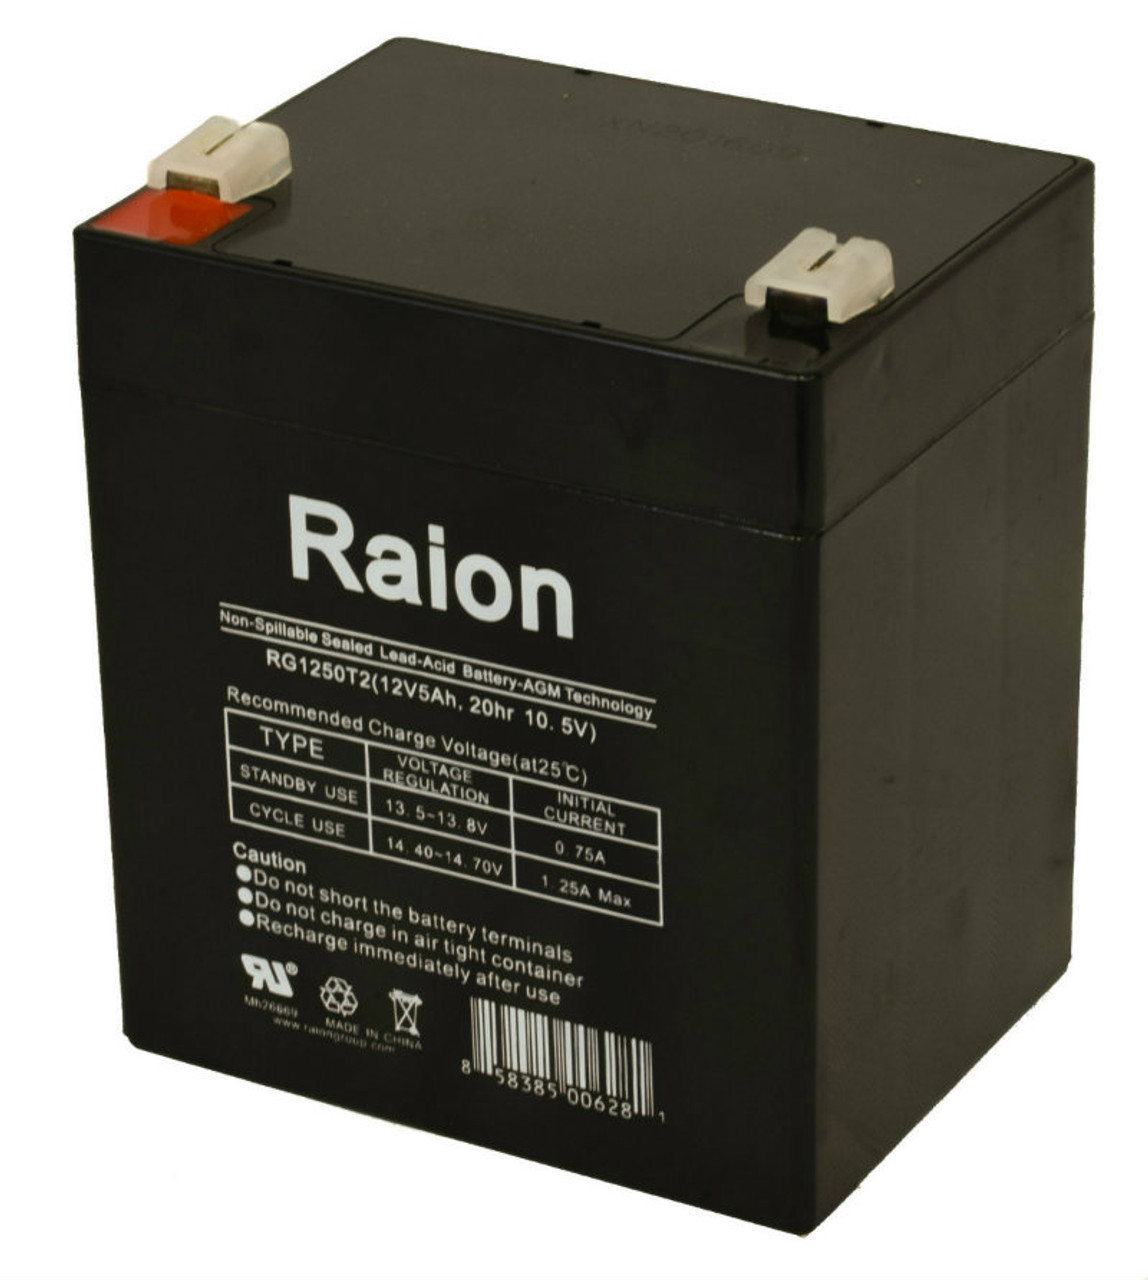 Raion Power RG1250T1 Replacement Fire Alarm Control Panel Battery for Securitron BPS246